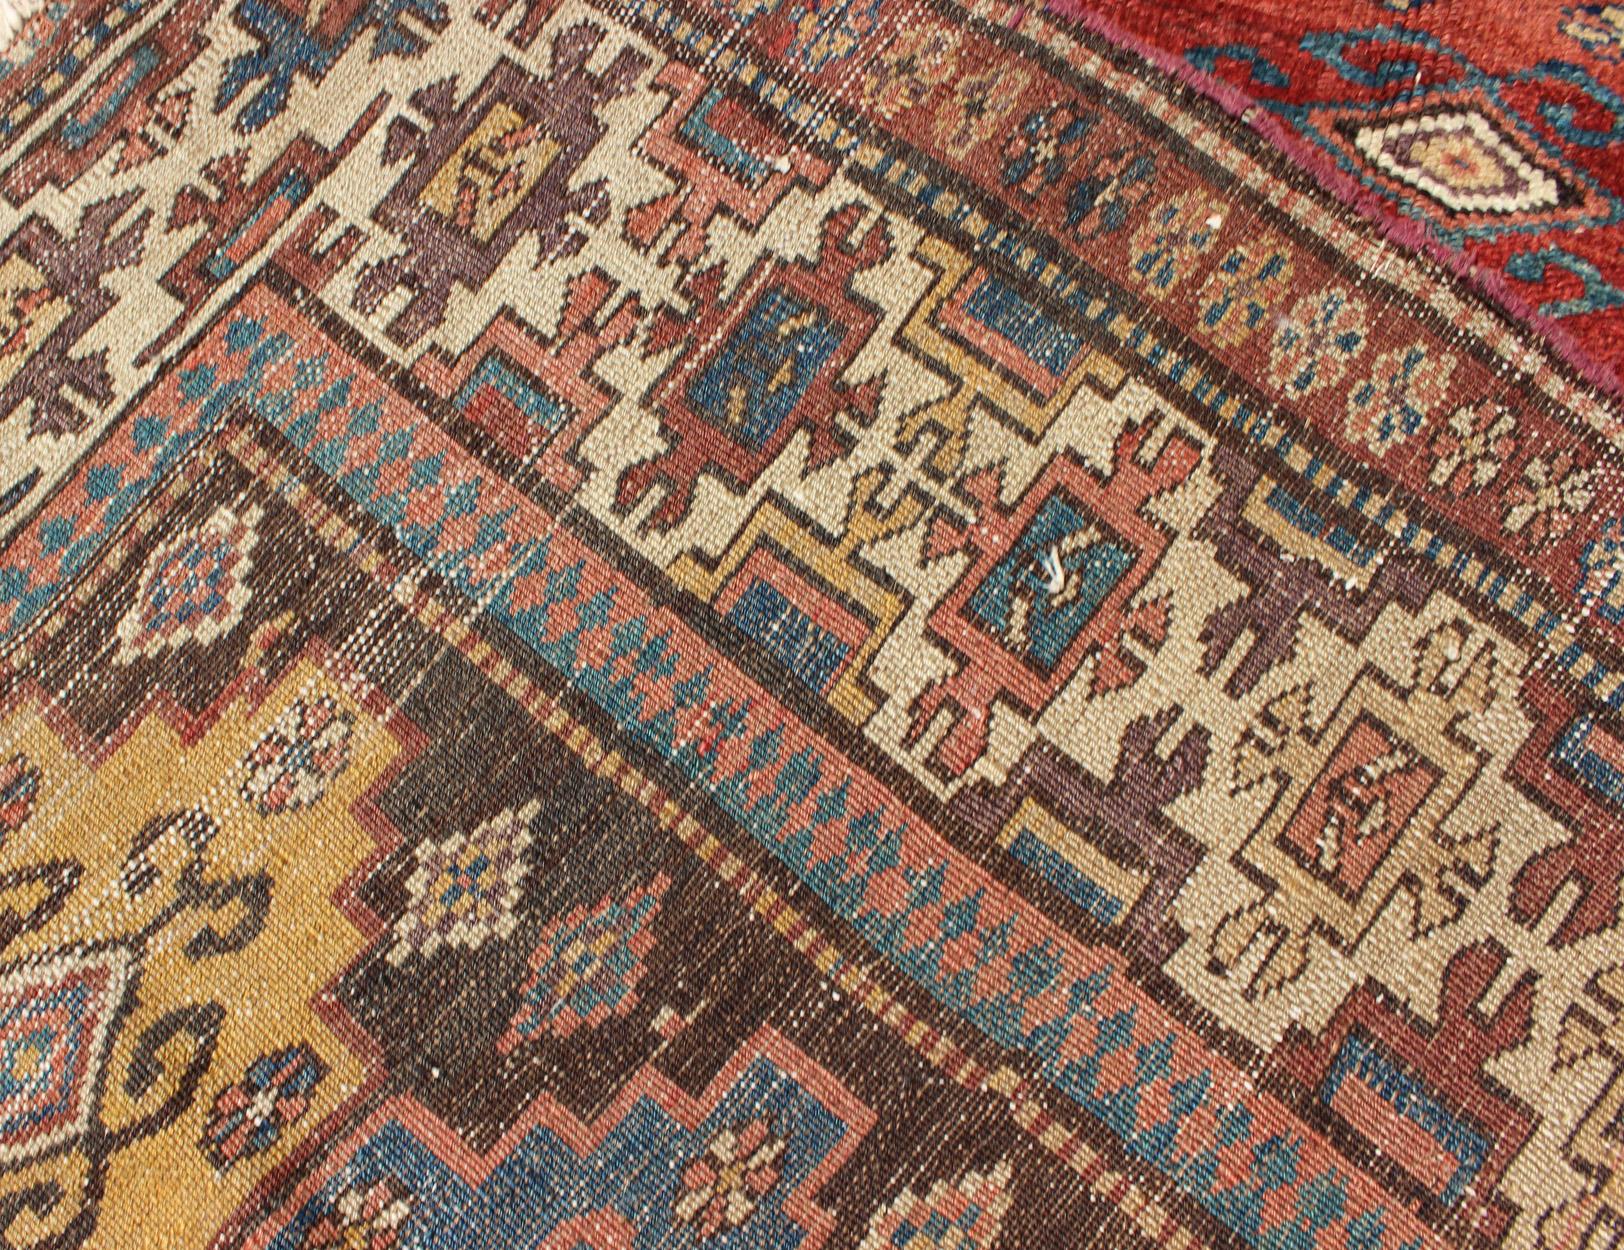 Antique N.W. Persian Gallery Rug in Jewel Tones with Diamond Geometric Motifs For Sale 2